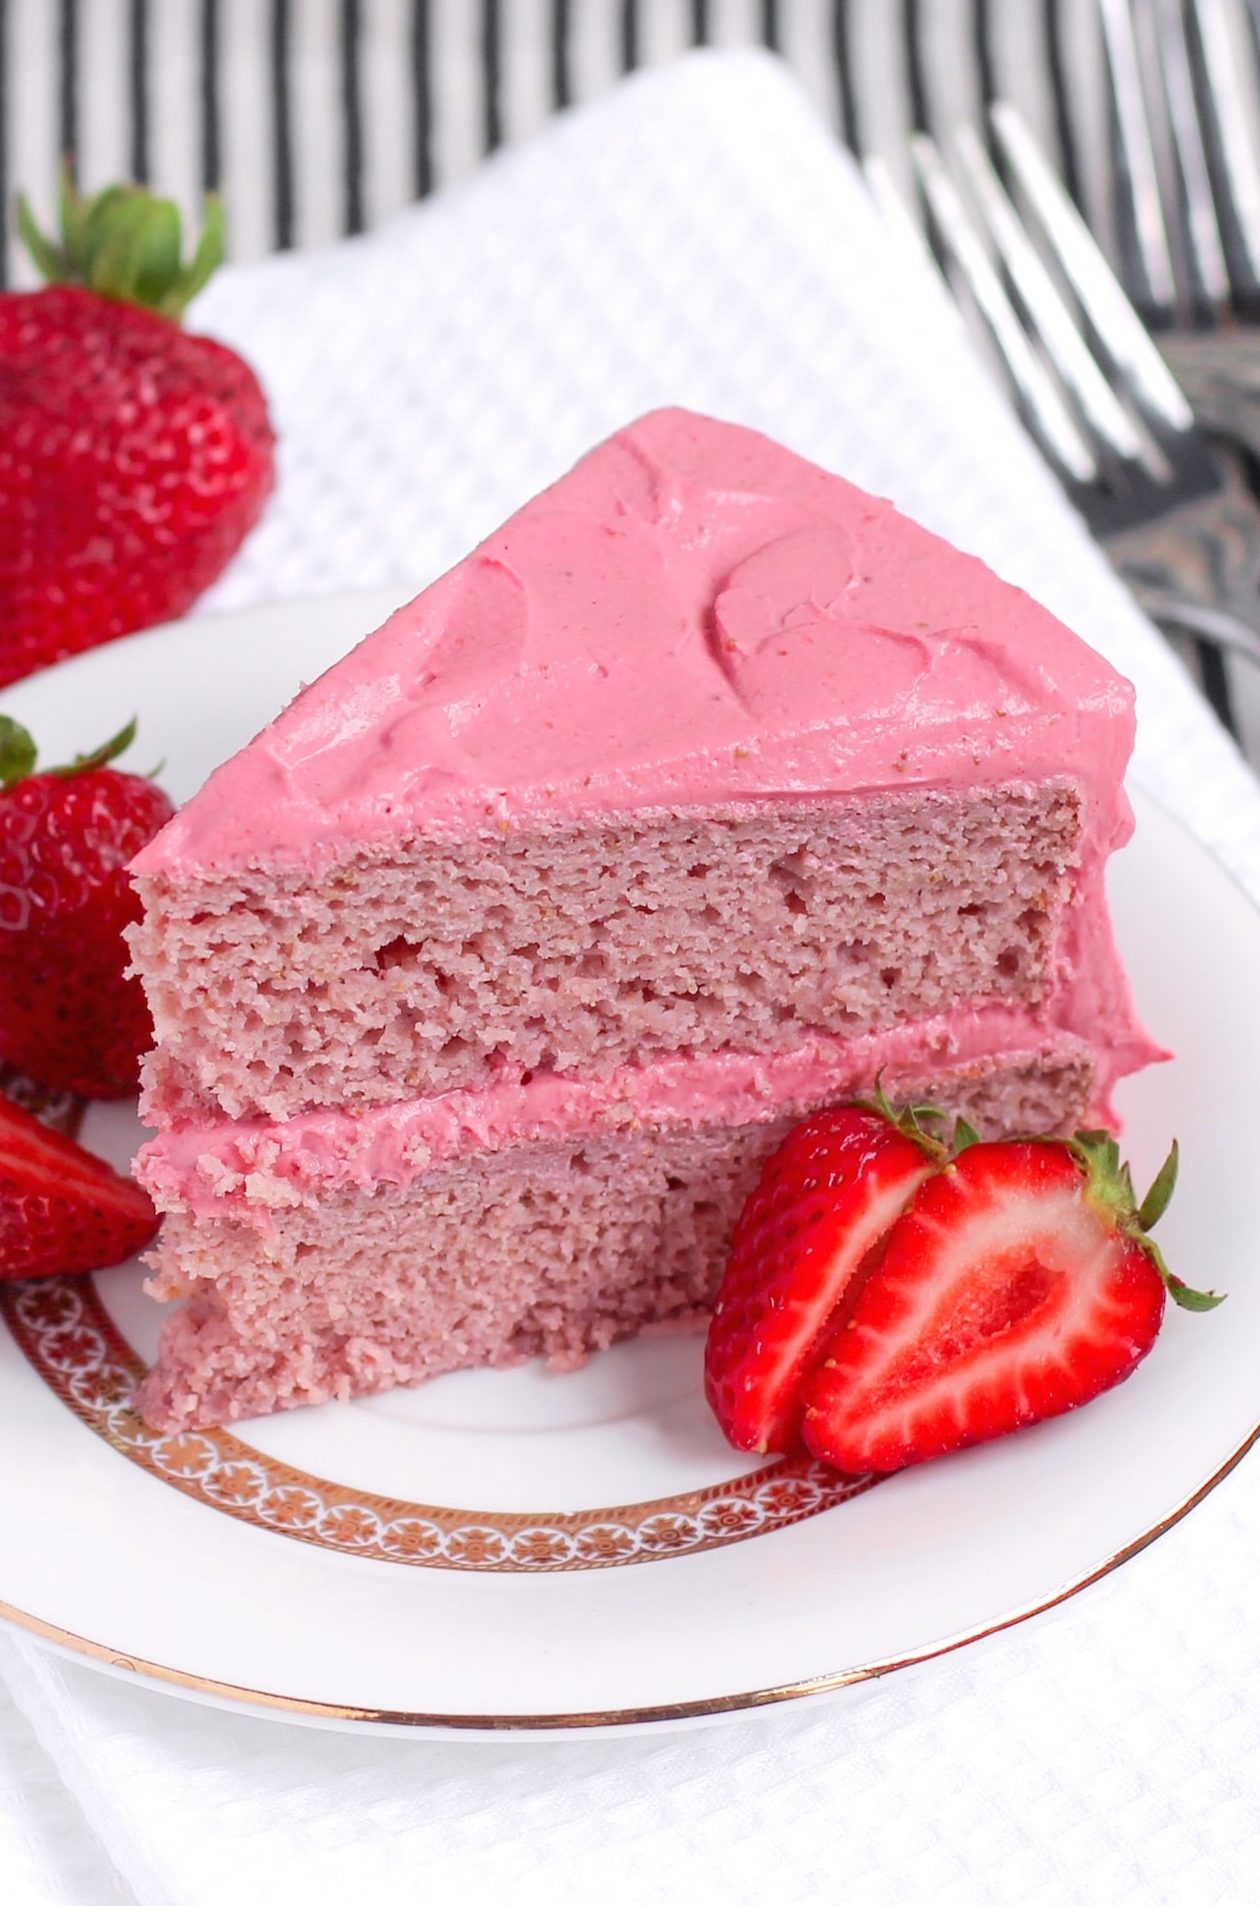 Healthy Strawberry Cake with Strawberry Frosting (refined sugar free, gluten free, high protein, high fiber)